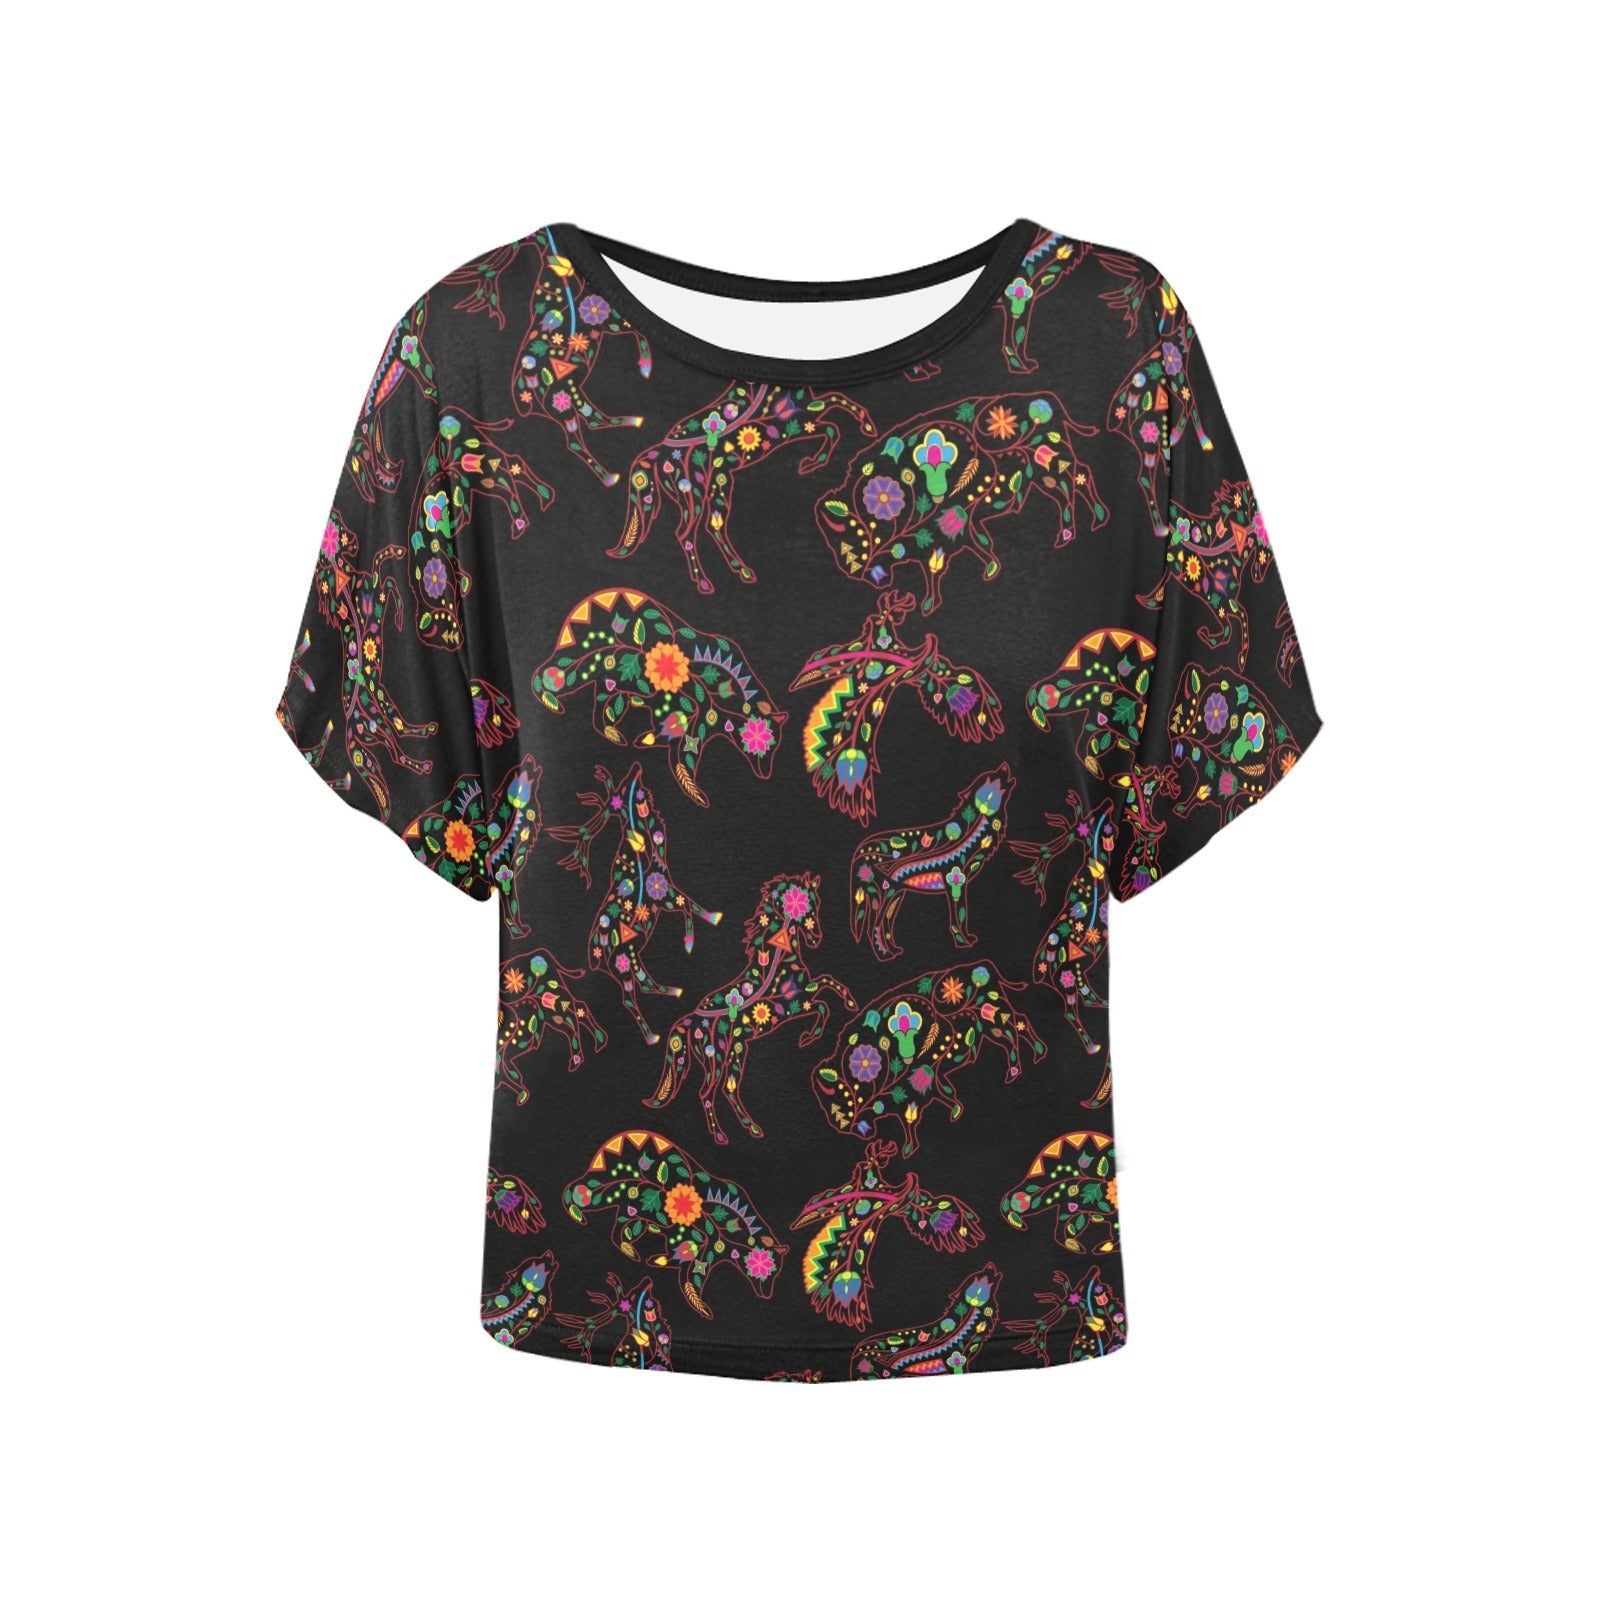 Neon Floral Animals Women's Batwing-Sleeved Blouse T shirt (Model T44) Women's Batwing-Sleeved Blouse T shirt (T44) e-joyer 